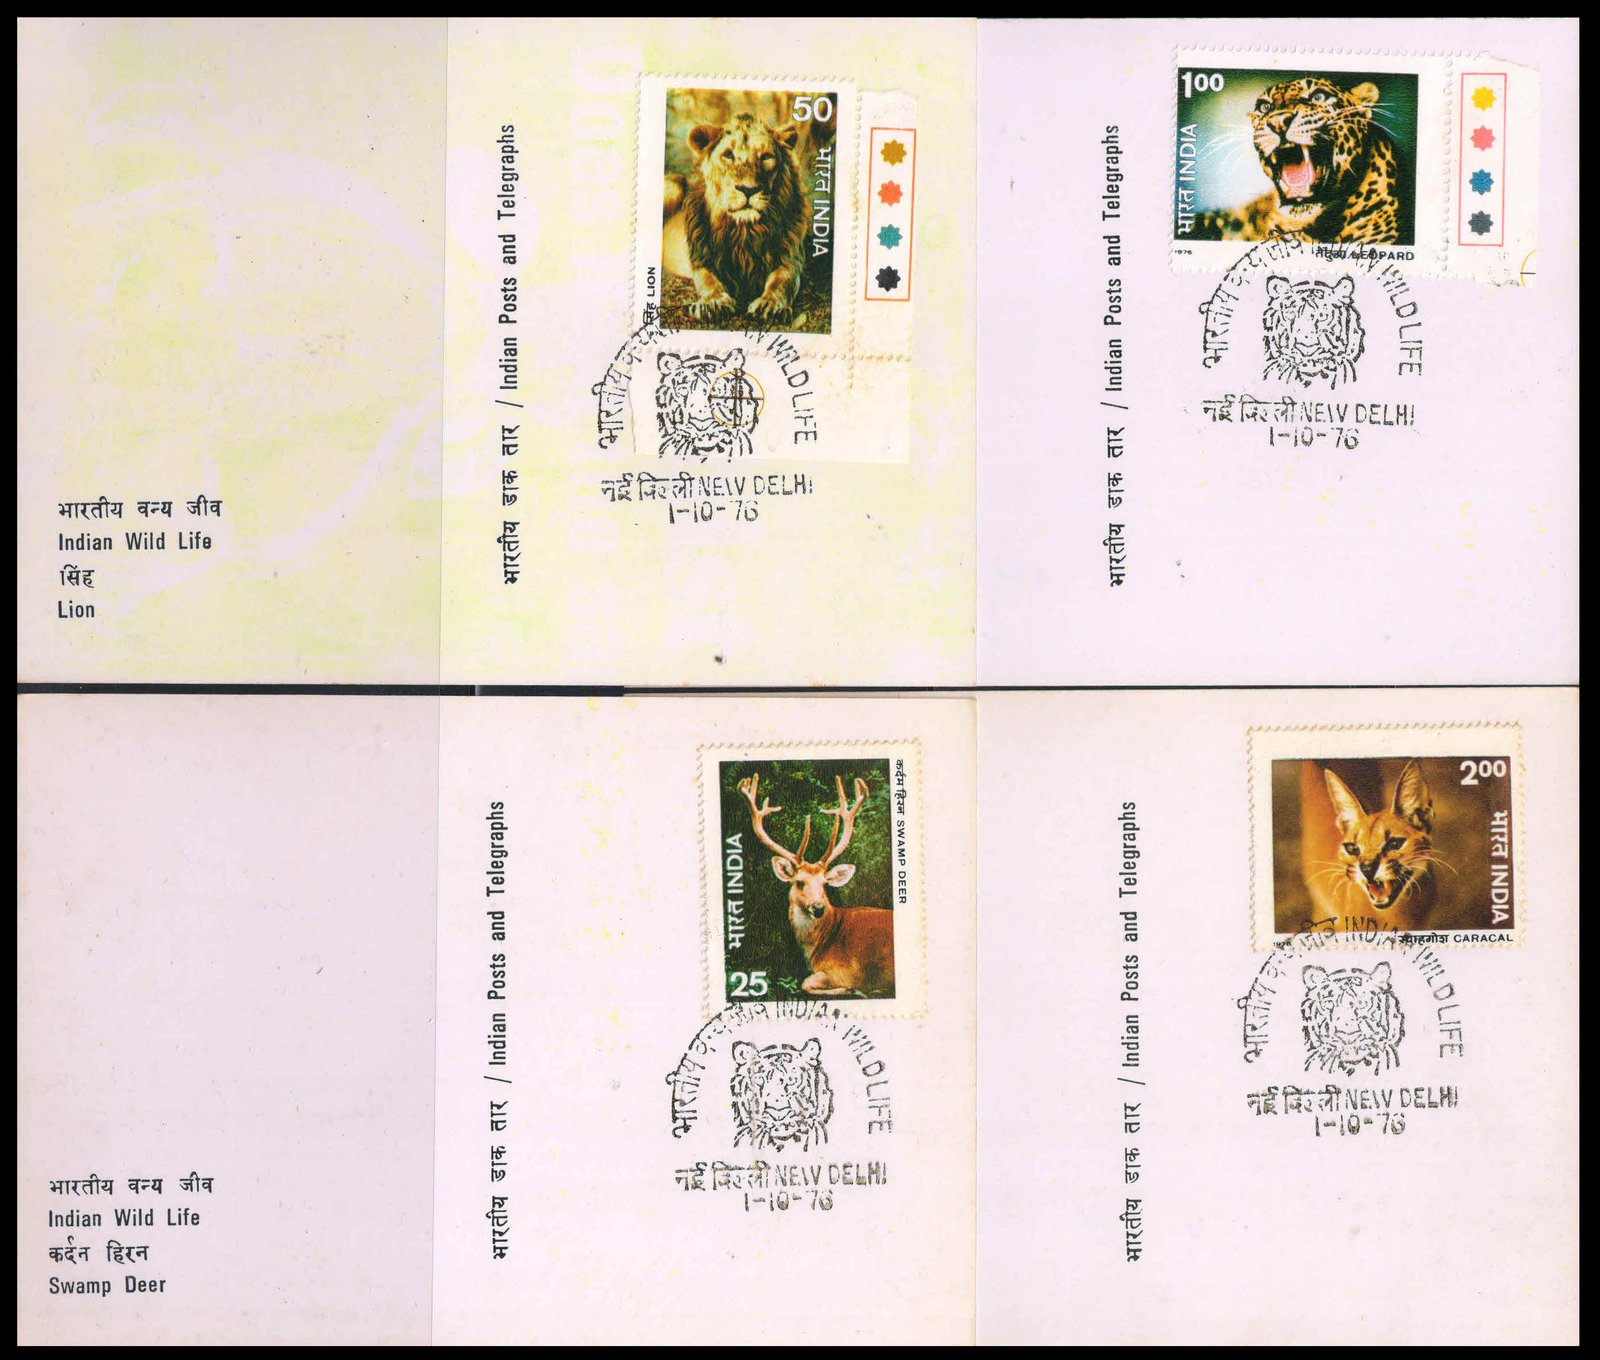 INDIA 1976 - indian Wild Life, Set of 4 Maxim Cards with Stamp & First Day Cancellation, as per Scan